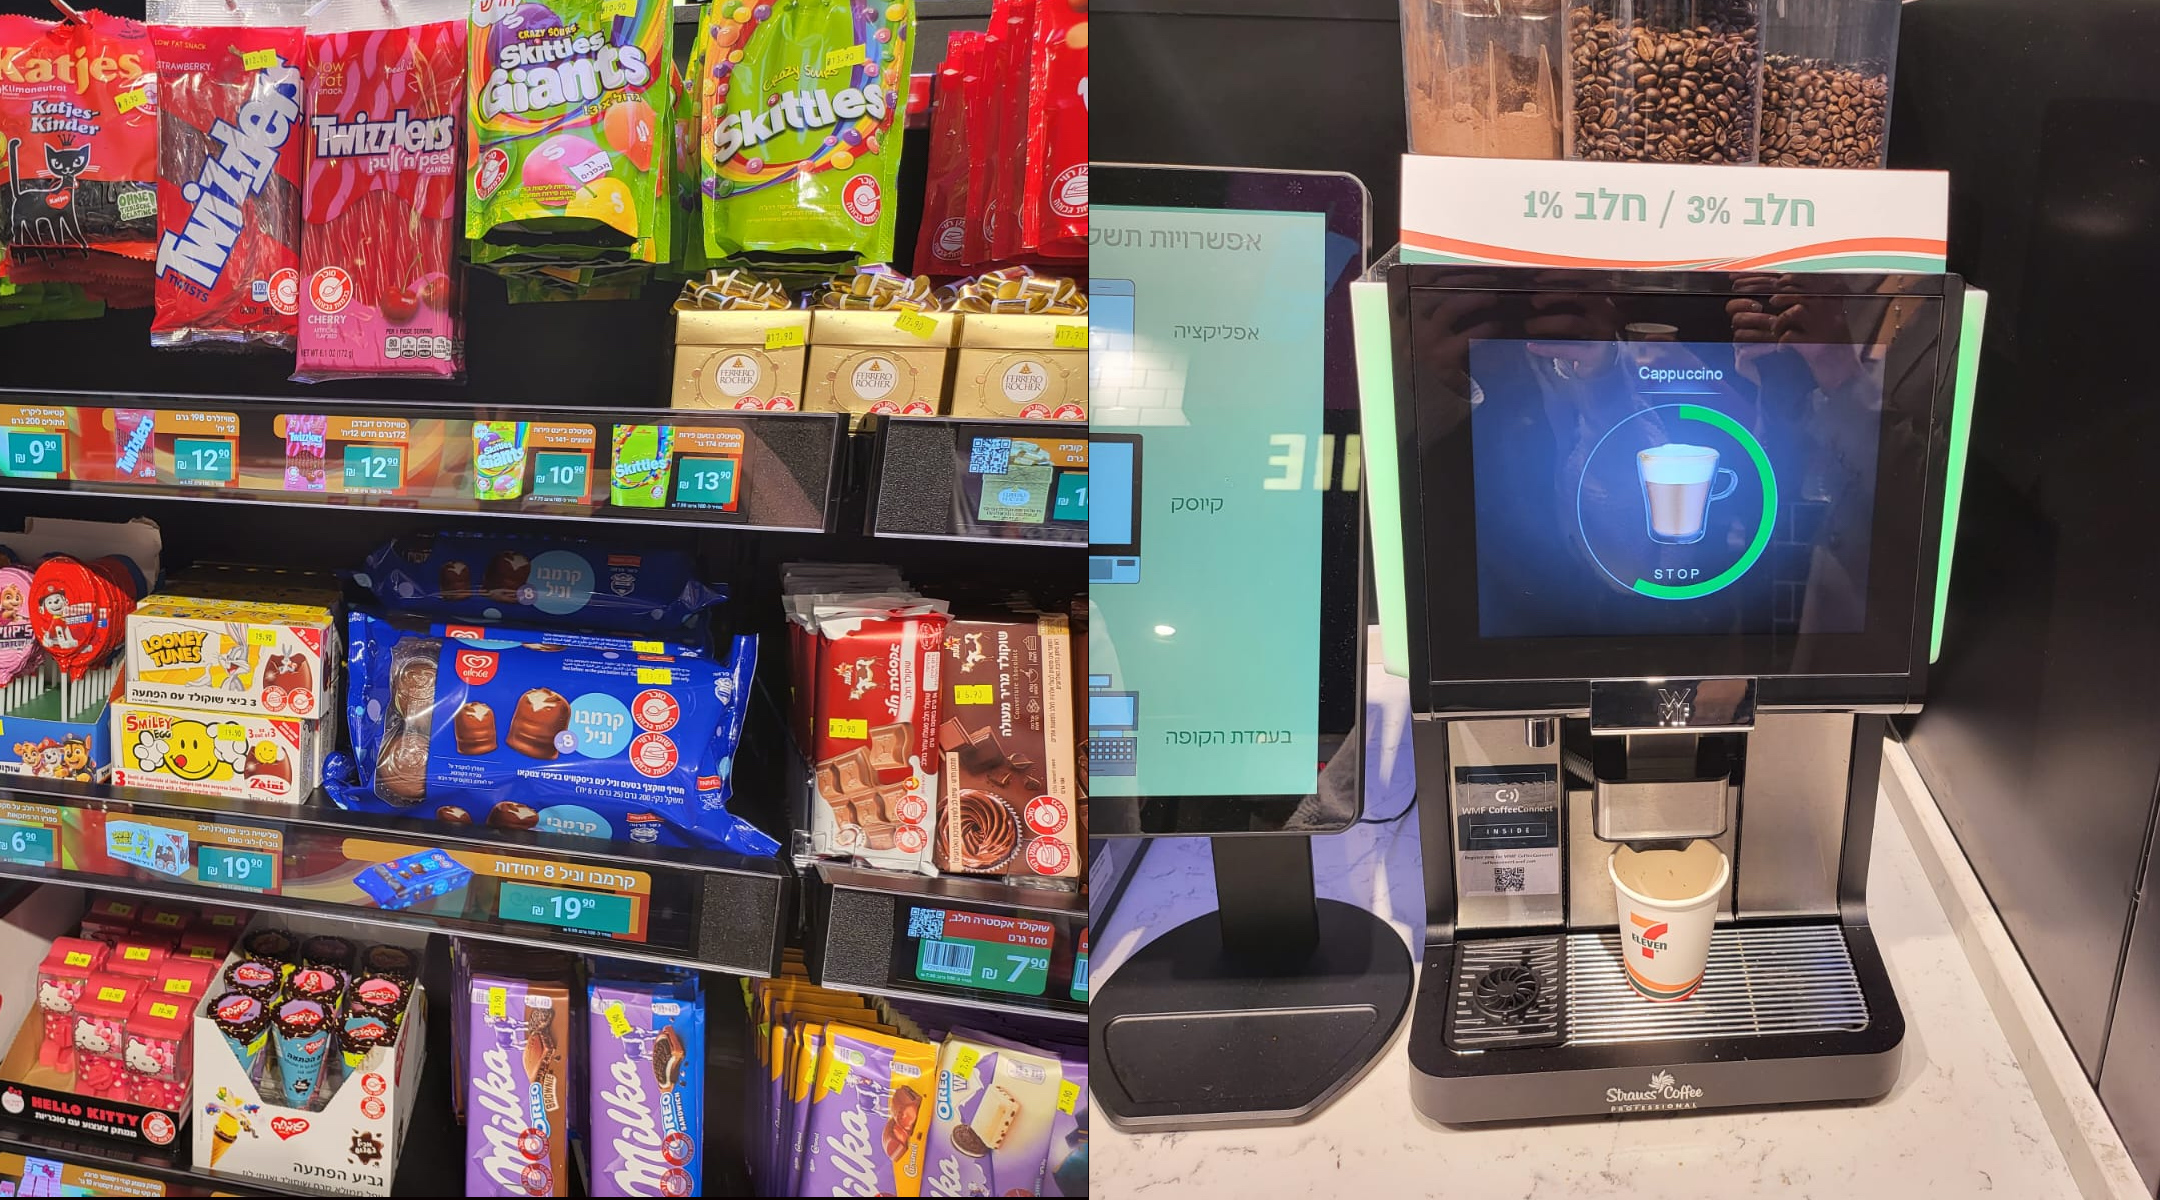 Israeli and American candies share the shelves at Israel’s new 7-Eleven, while the high-tech coffee stations are a novelty in the country. (Deborah Danan)